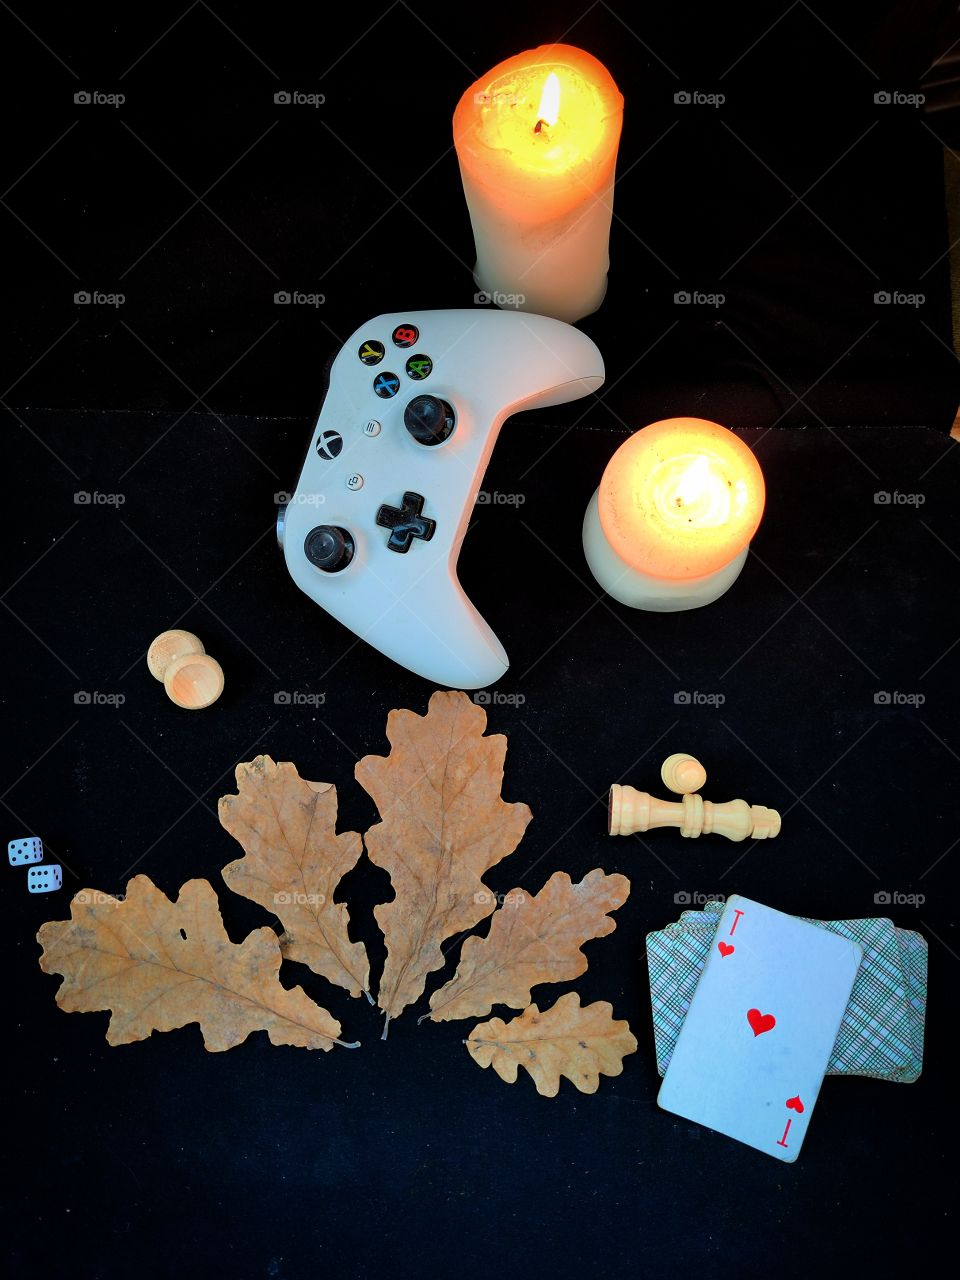 Games in the evening.  Composition.  Autumn oak leaves as pointers to popular games: dice, backgammon, gamepad, chess, cards. There are two burning candles nearby